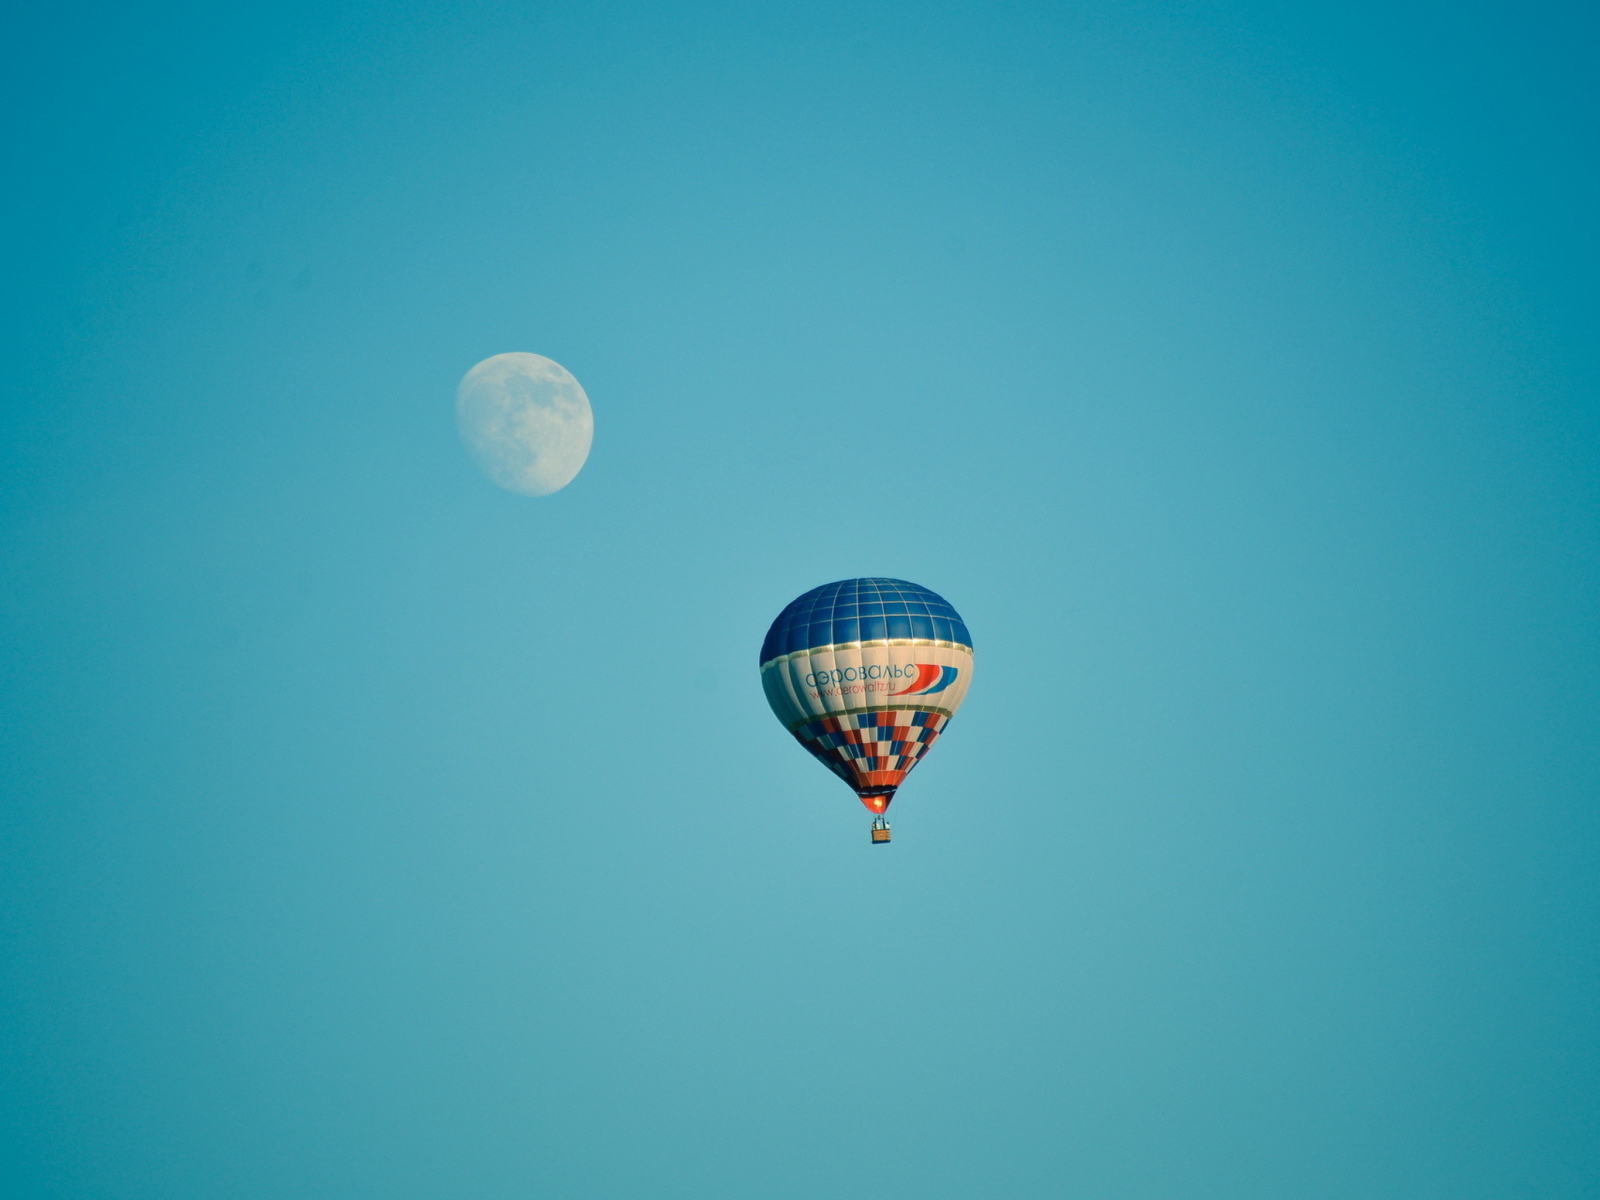 Air Balloon In Blue Sky In Front Of White Moon screenshot #1 1600x1200